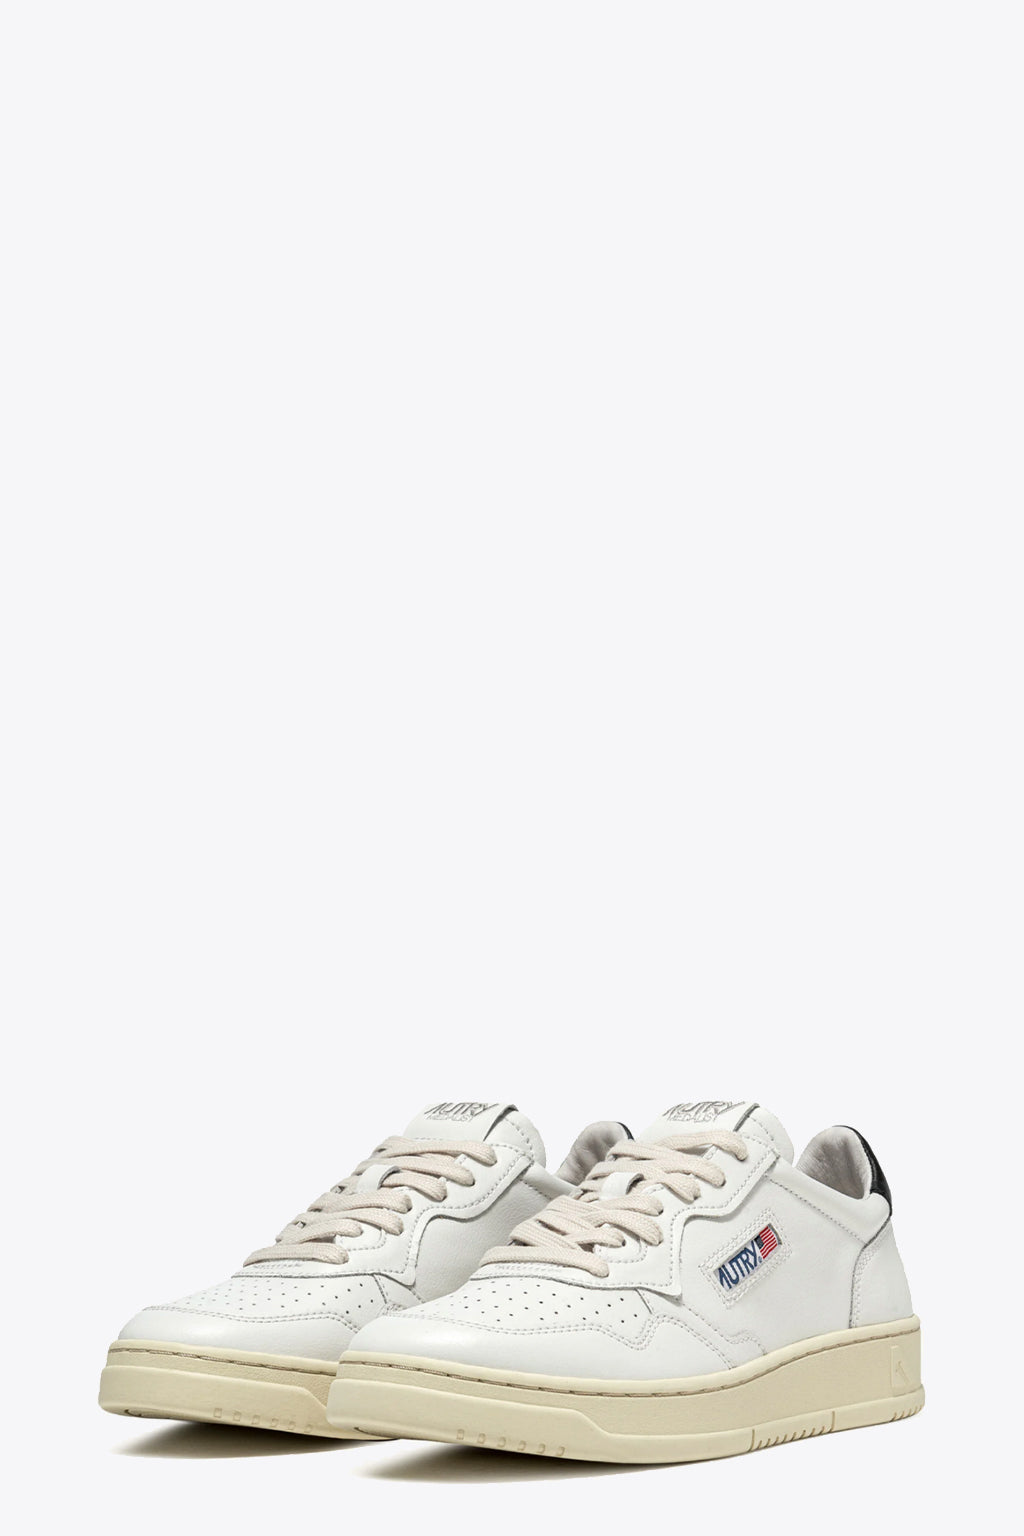 alt-image__White-leather-low-sneaker-with-black-tab---Medalist